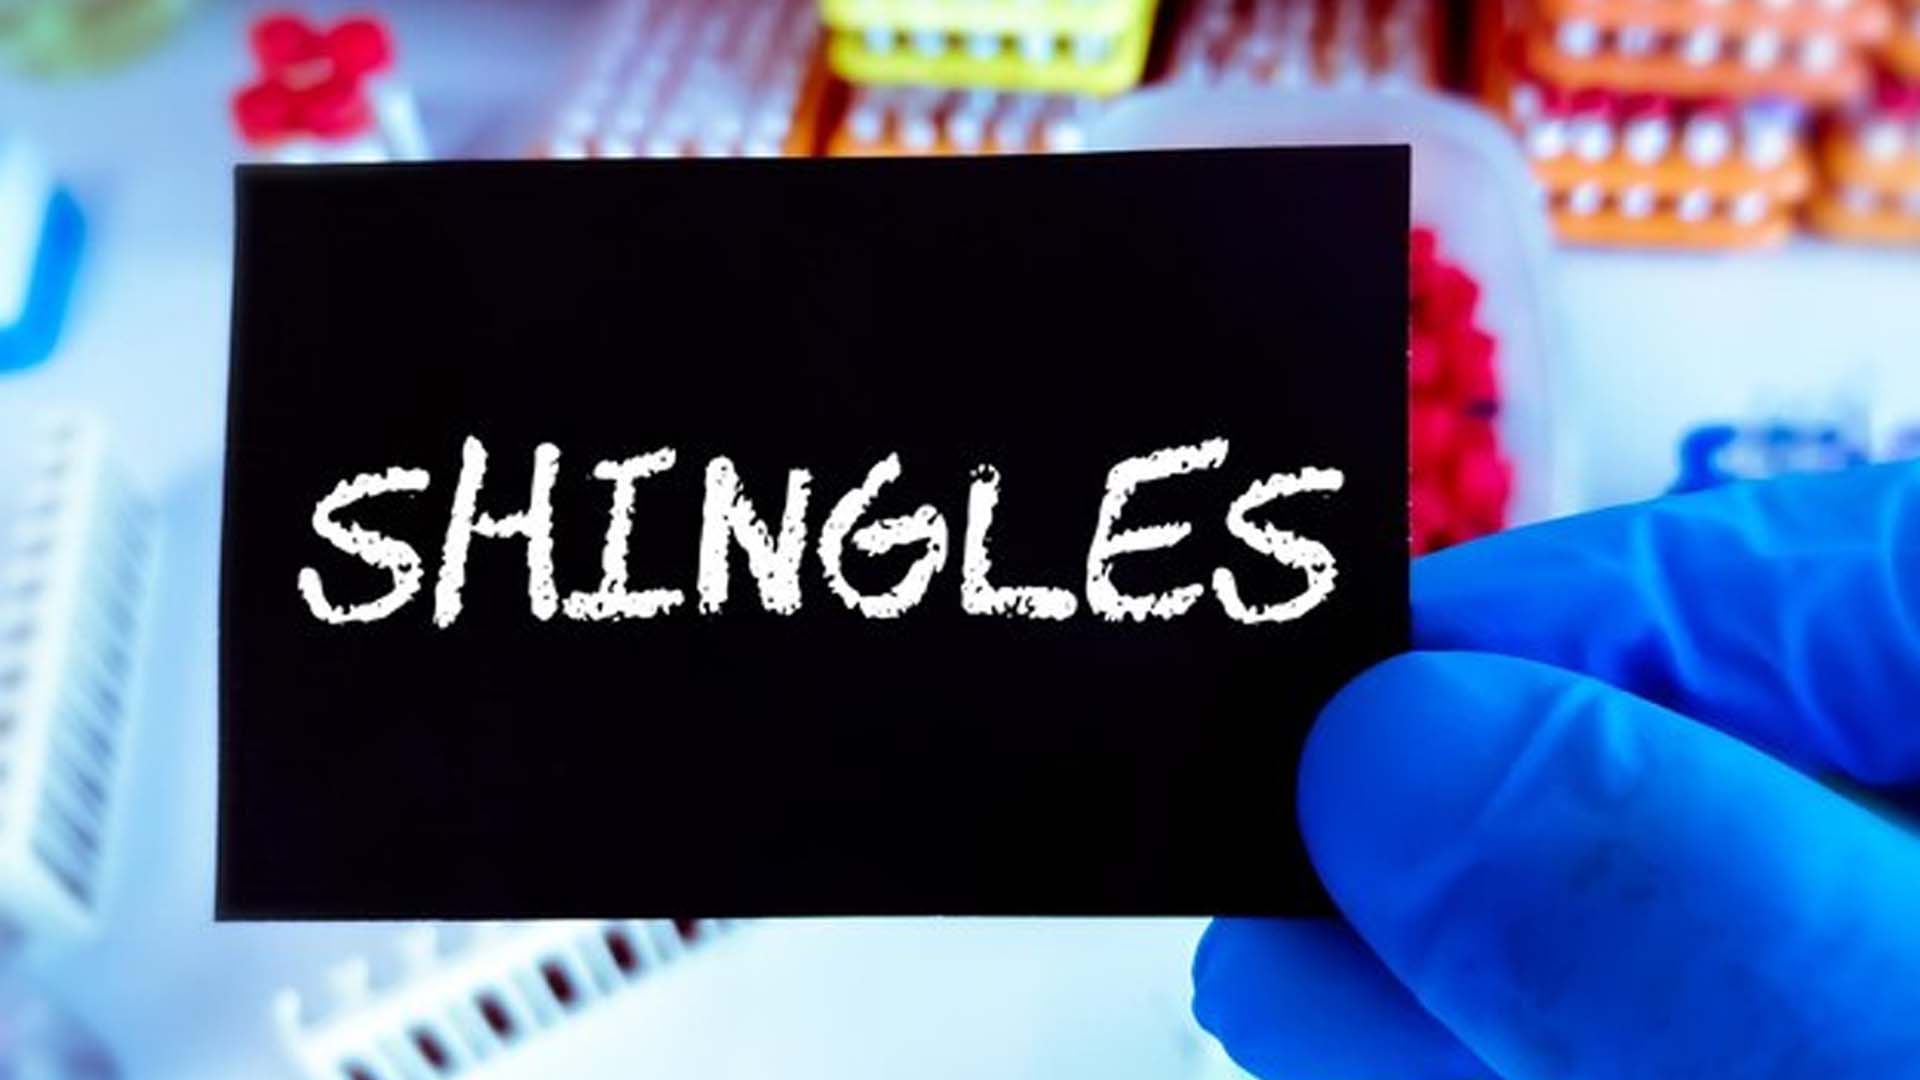 Shingles or Herpes zoster